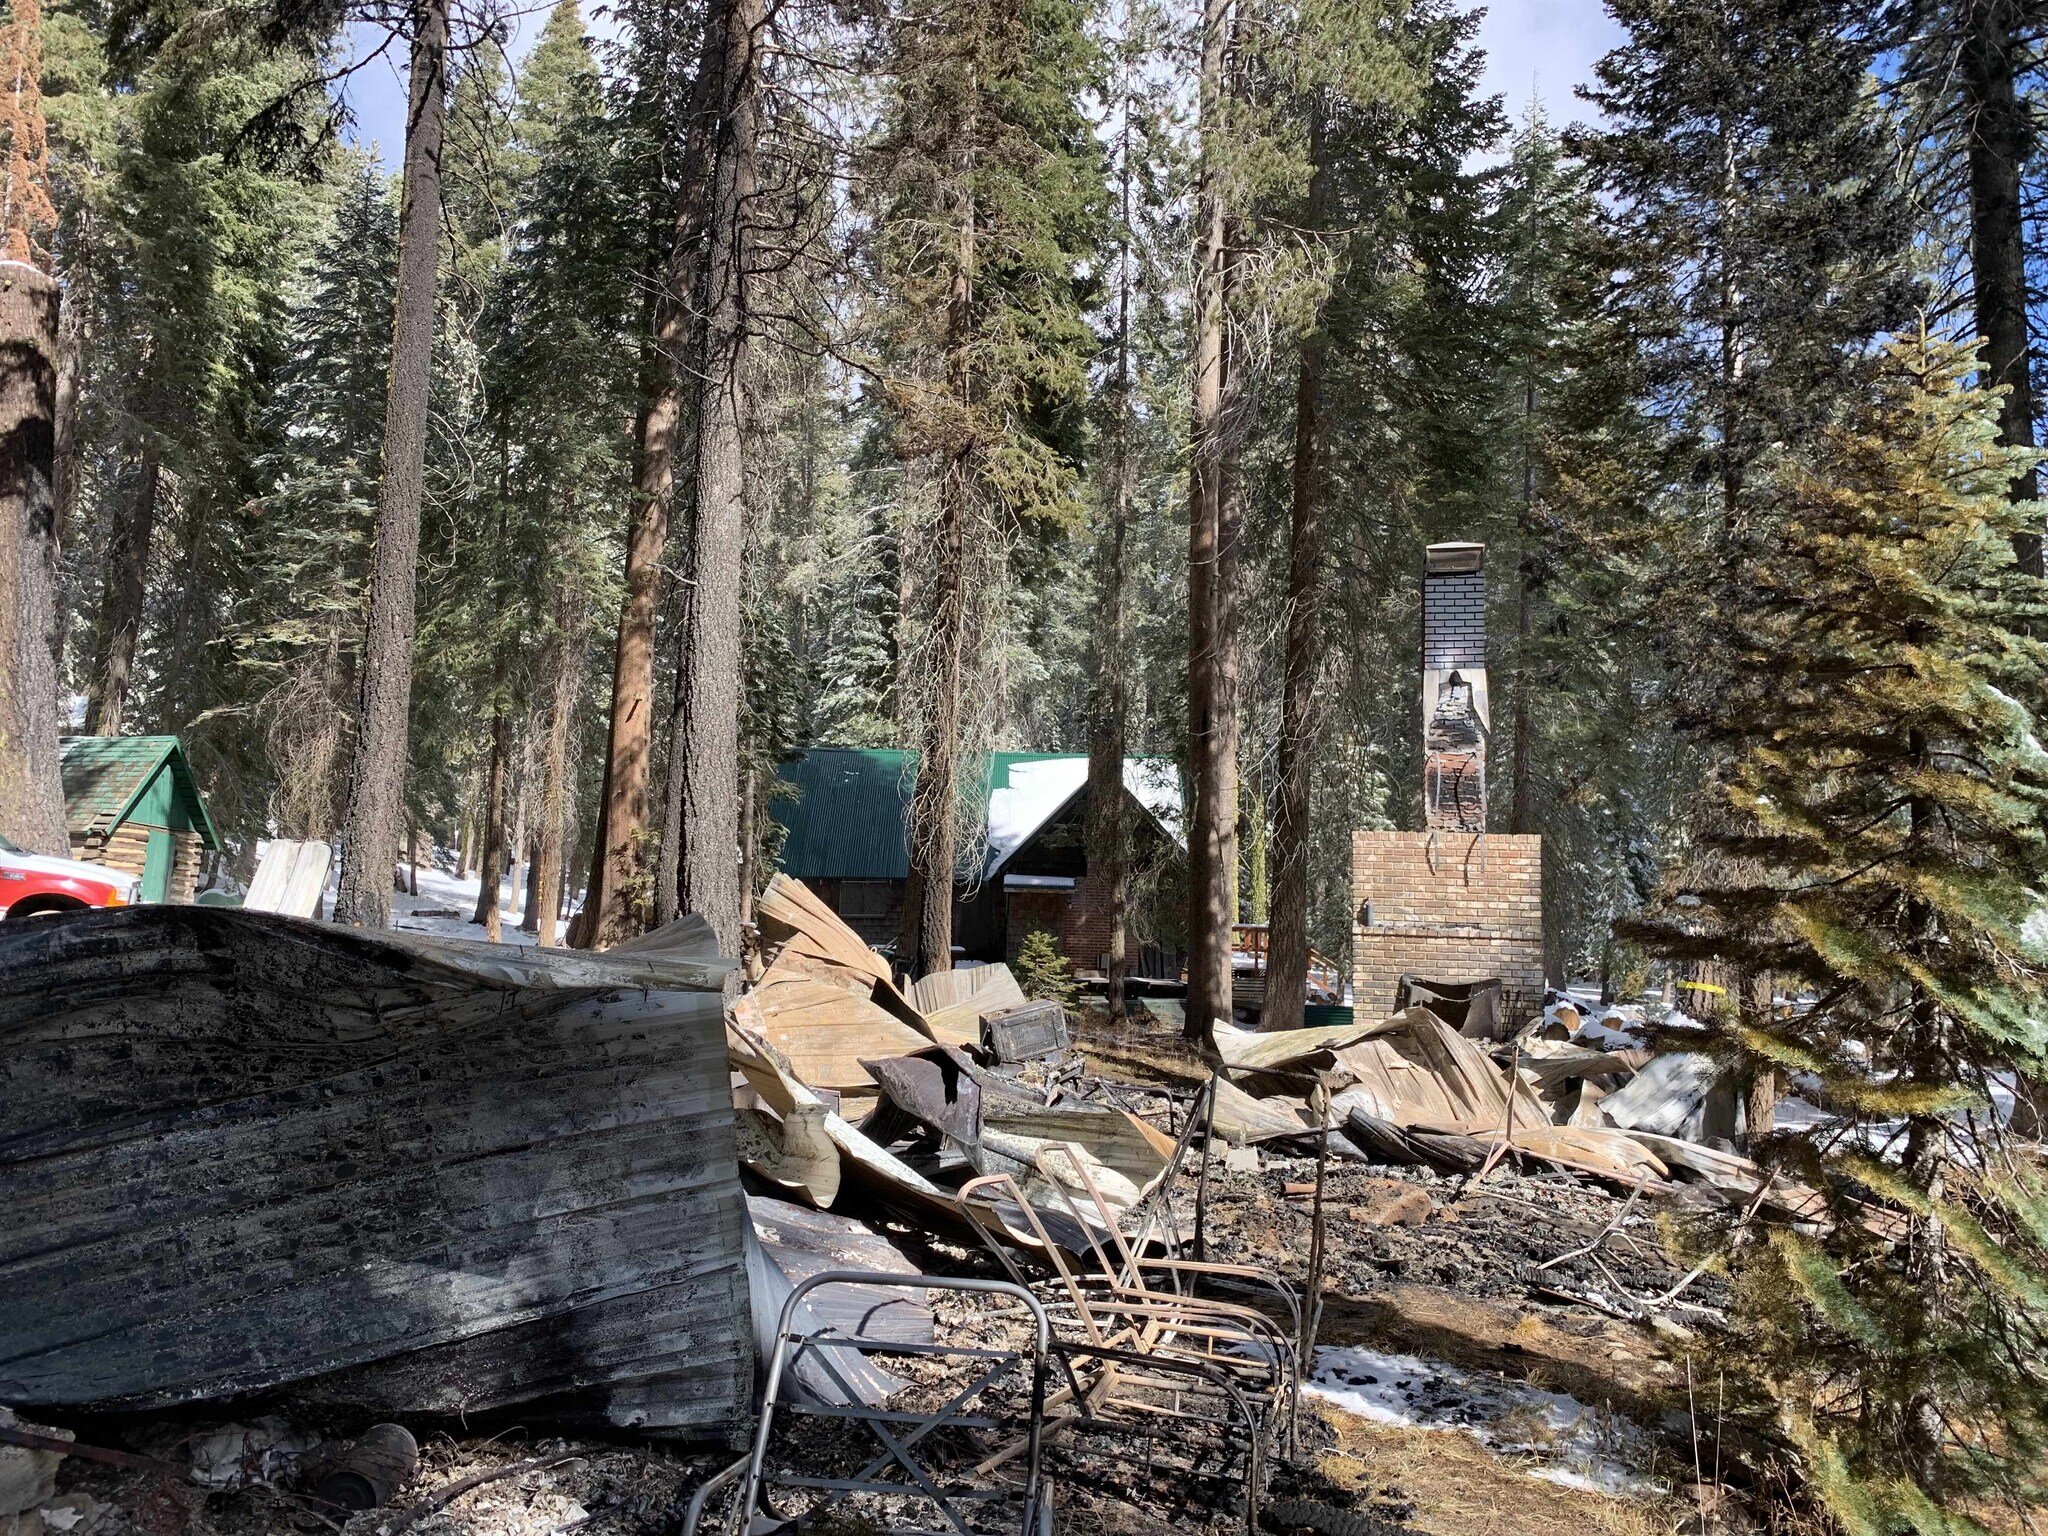 Thursday morning (November 3) your Huntington Lake Volunteer Fire Department and CalFire were dispatched to a structure fire in the Idylwilde Tract.  We arrived at scene to find a cabin that caught fire last night and burned throughout the night only